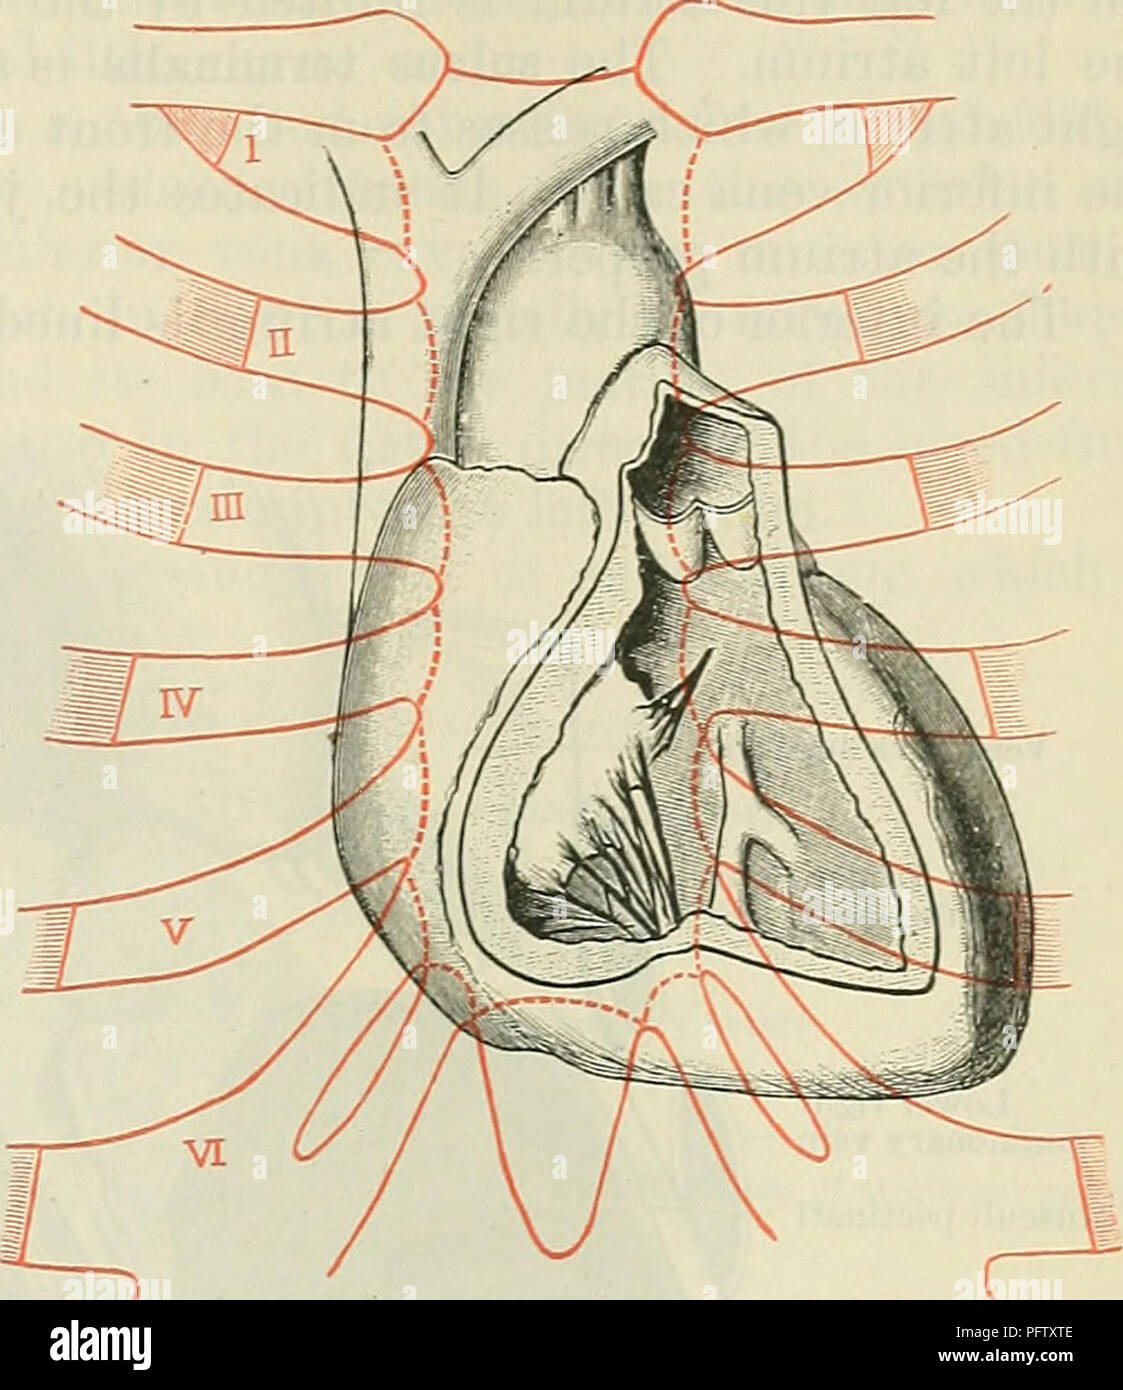 . Cunningham's Text-book of anatomy. Anatomy. THE CHAMBEES OF THE HEAET. 873 coronary sulcus, which runs obliquely from above downwards, and from left to right, from the level of the third left to that of the sixth right costal cartilage. The upper section of the surface, which is concave anteriorly, is formed by the atria; it is separated from the sternum by the ascending aorta and the pulmonary artery, and is continuous laterally with the auricles of the atria which, projecting forwards, embrace the great vessels. The lower section of the sterno-costal surface is convex; it is formed by the  Stock Photo